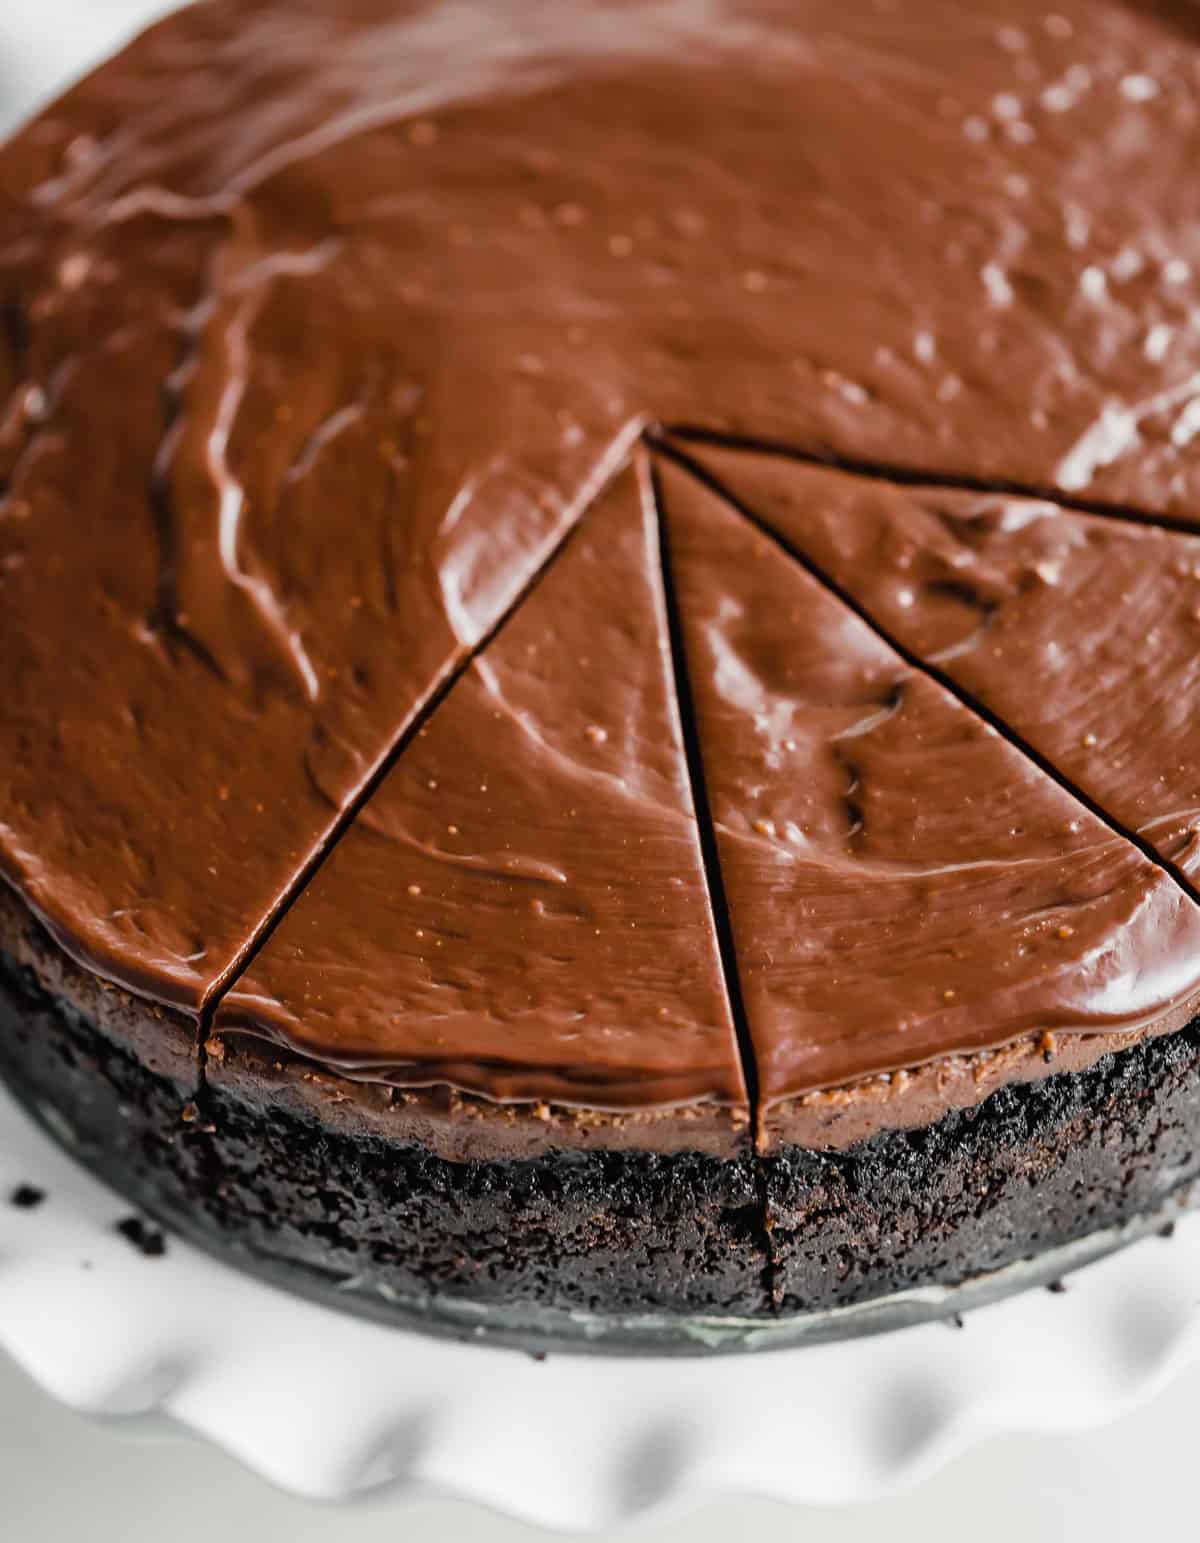 A nutella ganache topped Nutella Cheesecake baked on an Oreo crust, with several slices cut into the cheesecake.